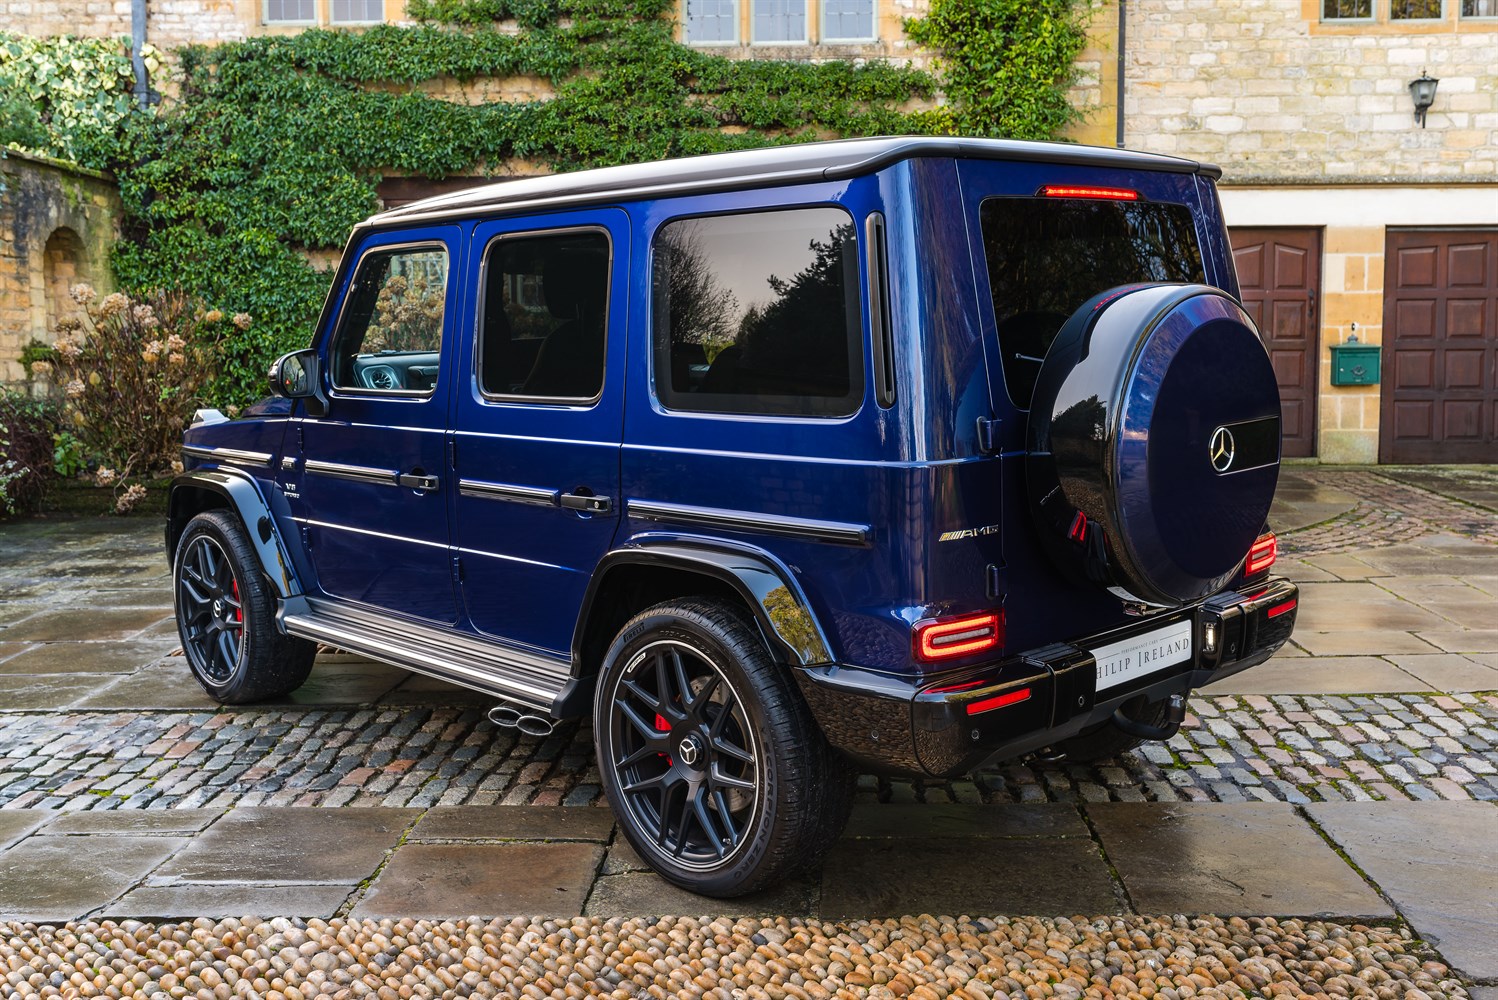 https://philipireland.com/_userfiles/pages/images/cars/g63_mystic_blue_bright/mercedes_g63_7_1498x1000.jpg